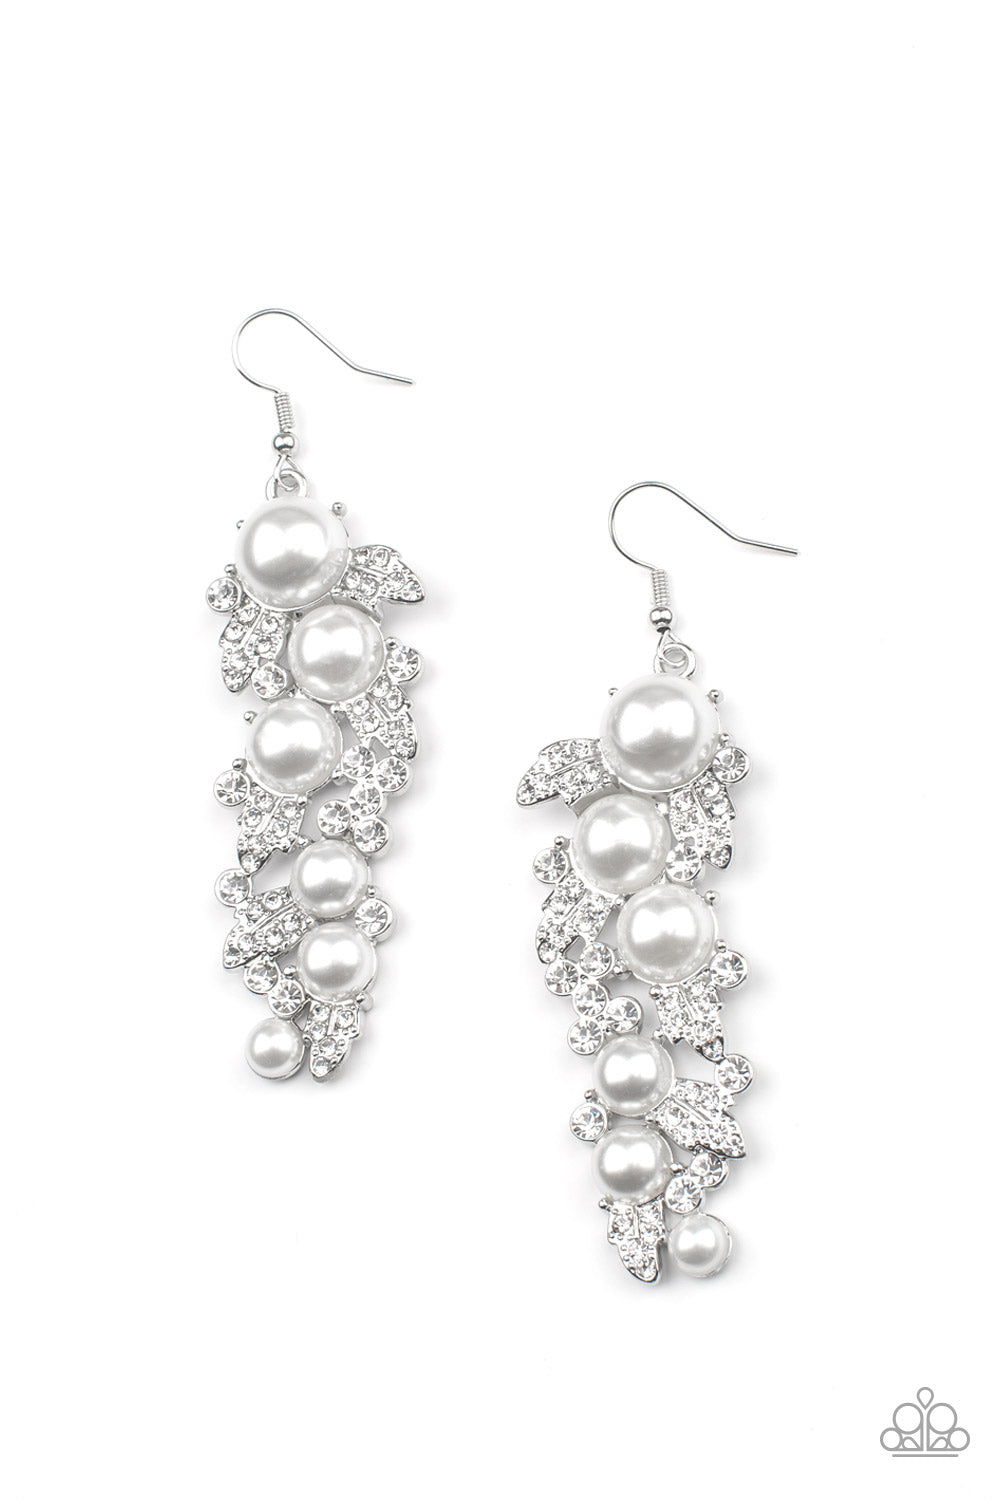 Paparazzi ♥ The Party Has Arrived - White ♥ Earrings